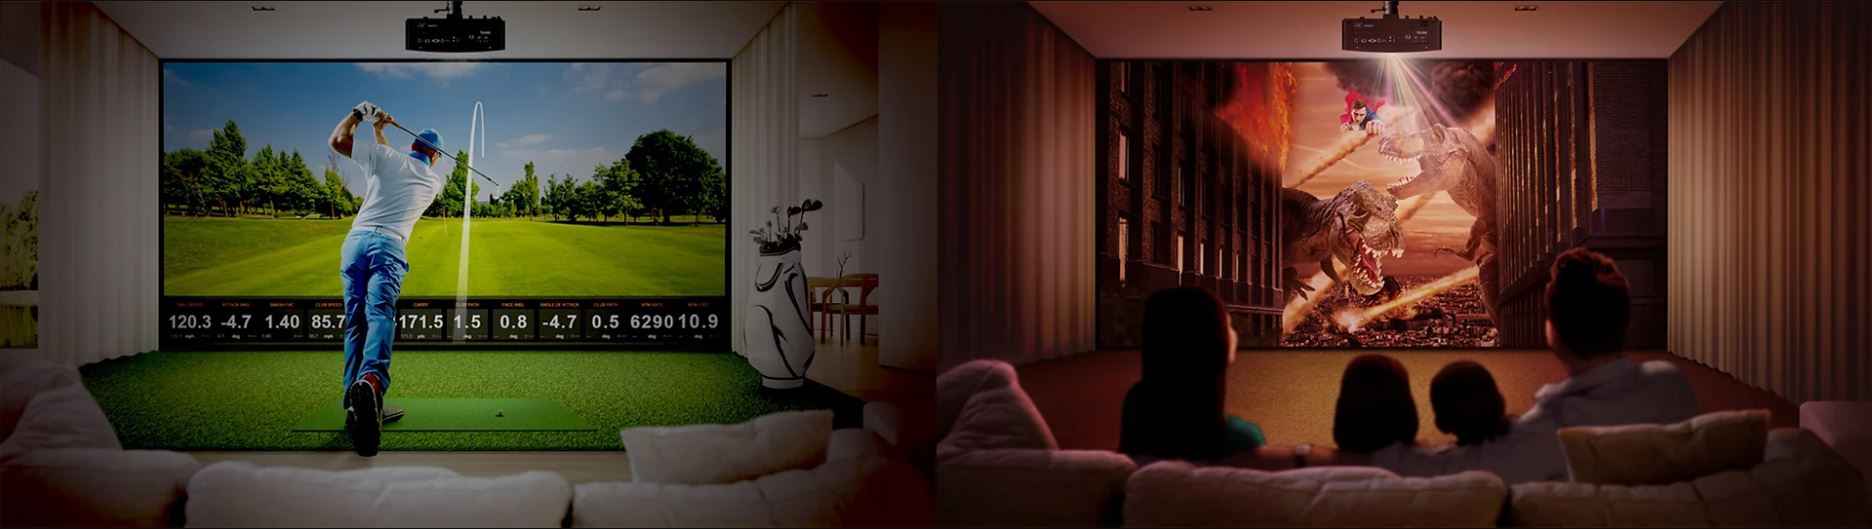 BenQ Middle East Elevates Experience at MyGolfDubai through the Installation of its Ultimate Golf Simulation Projector